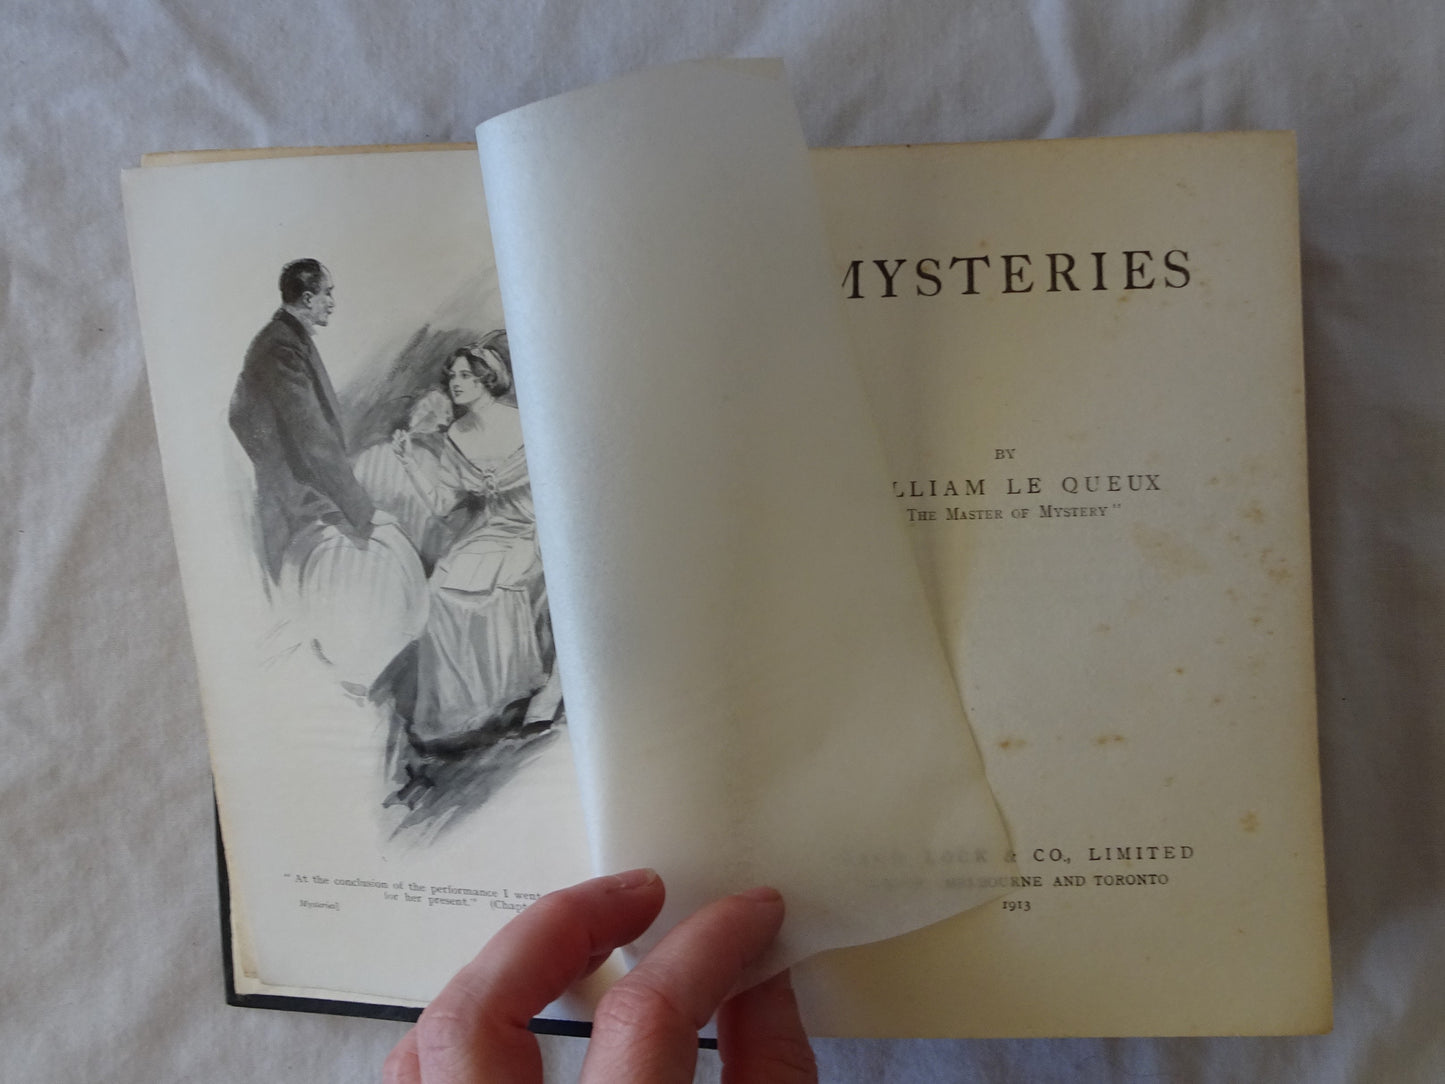 Mysteries by William Le Queux